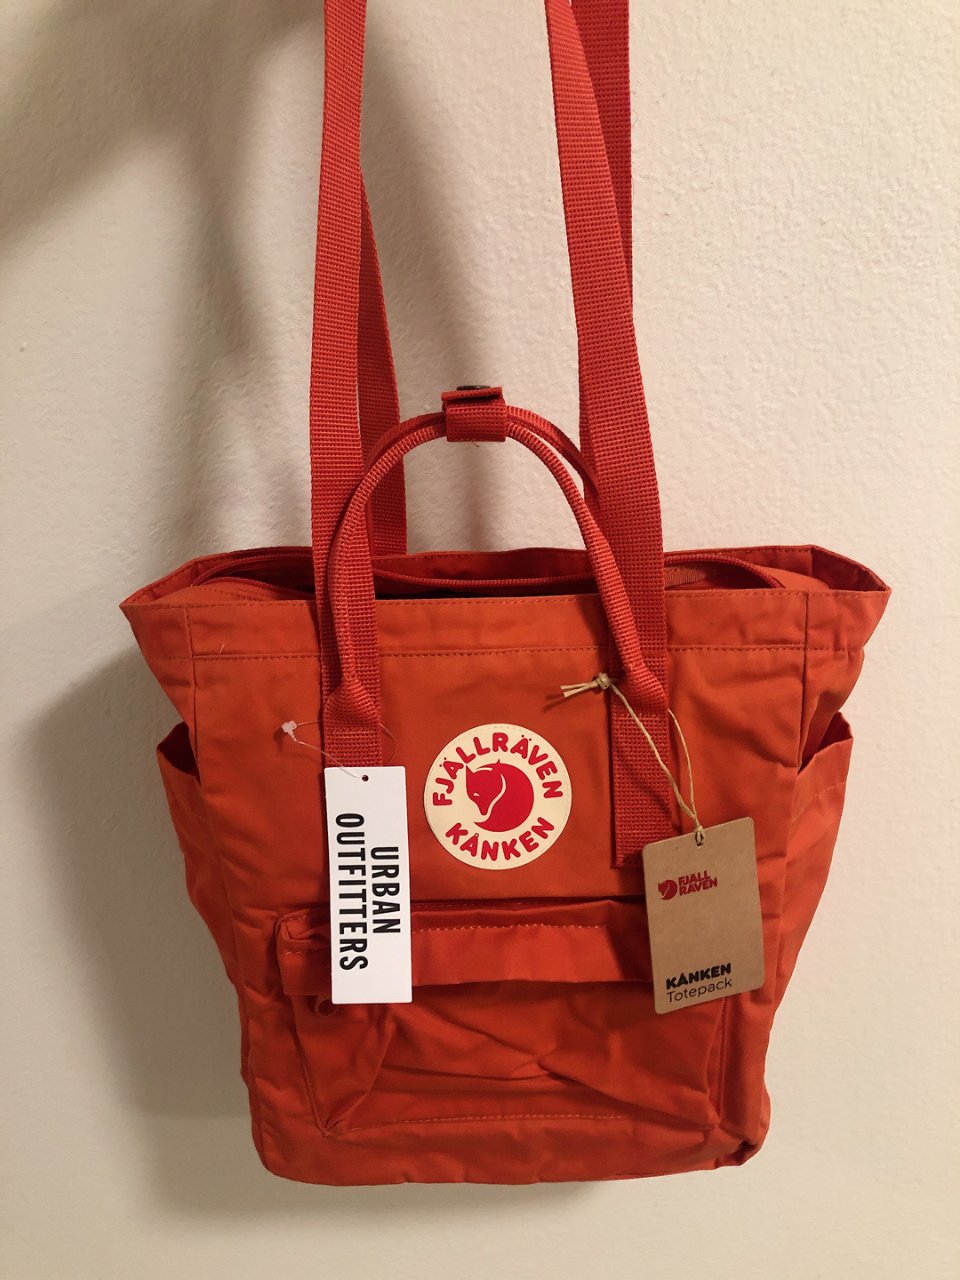 Fjallraven 北极狐,Urban Outfitters